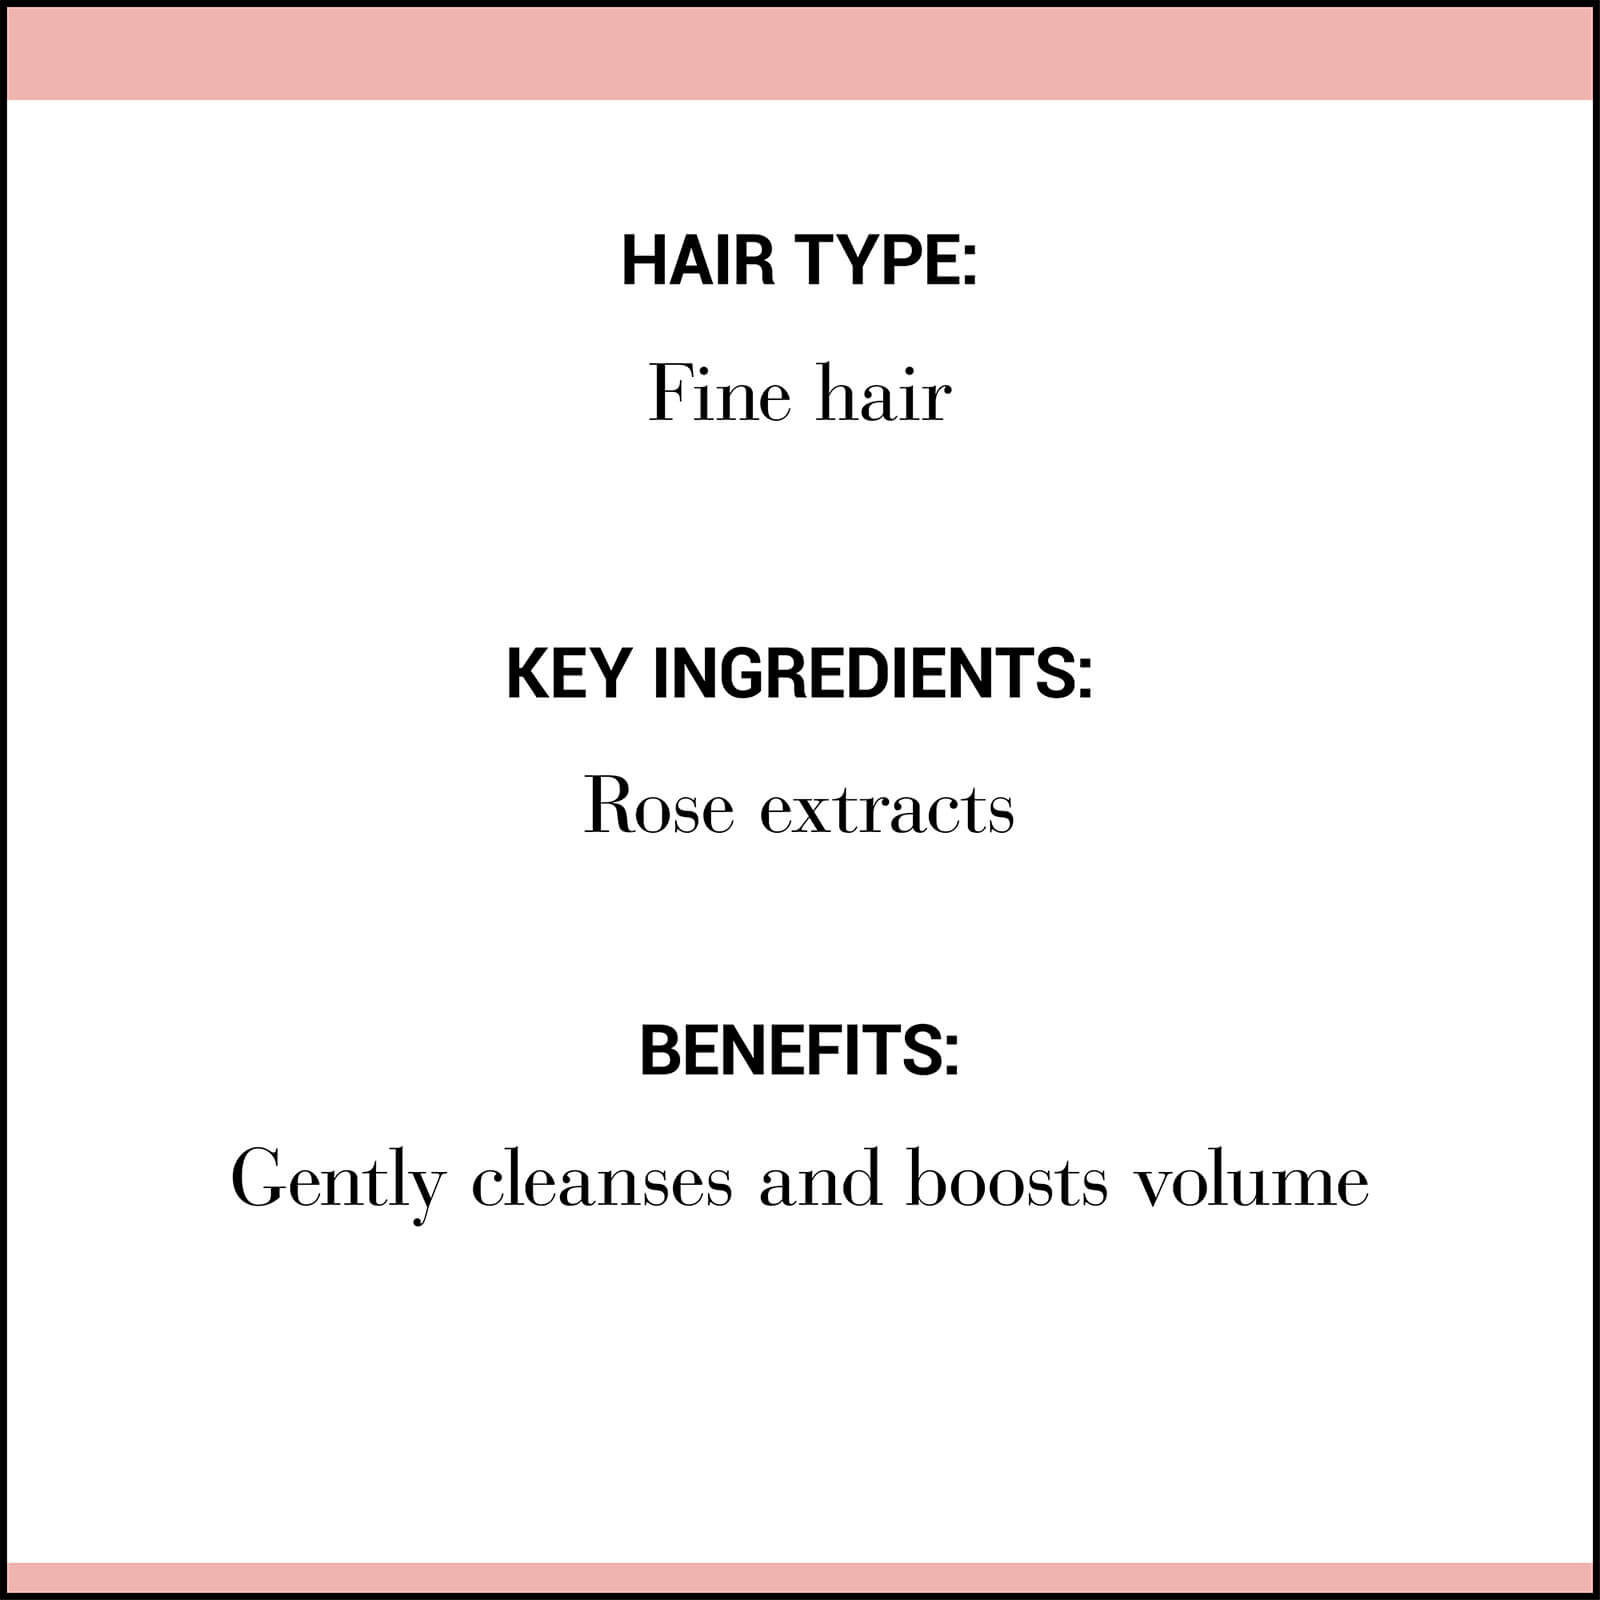 Shop Christophe Robin Delicate Volumising Shampoo With Rose Extracts 250ml